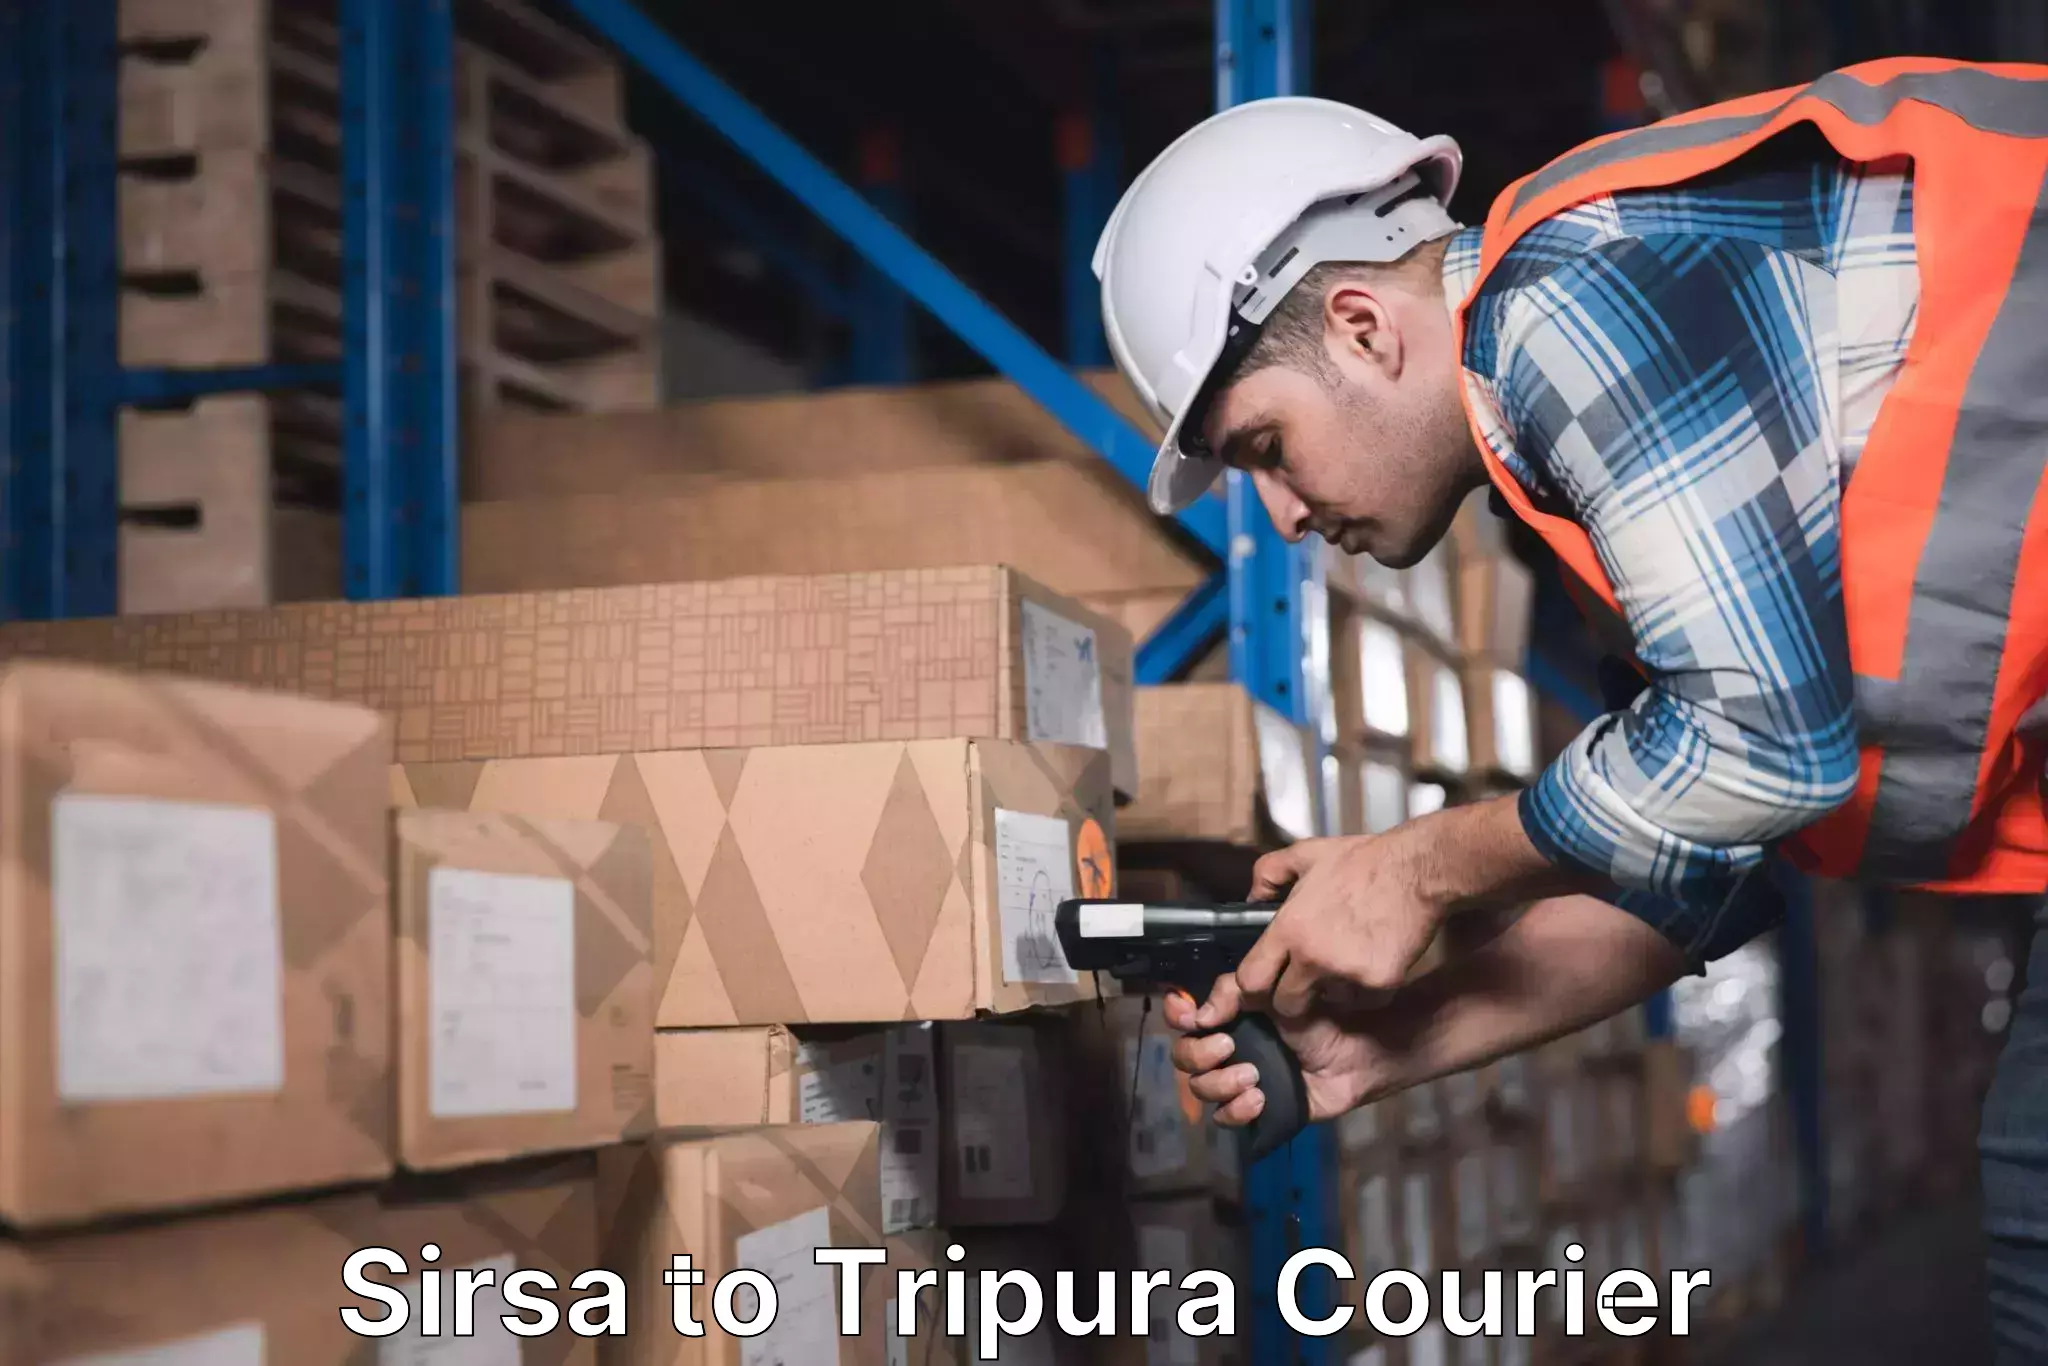 On-time delivery services Sirsa to Udaipur Tripura